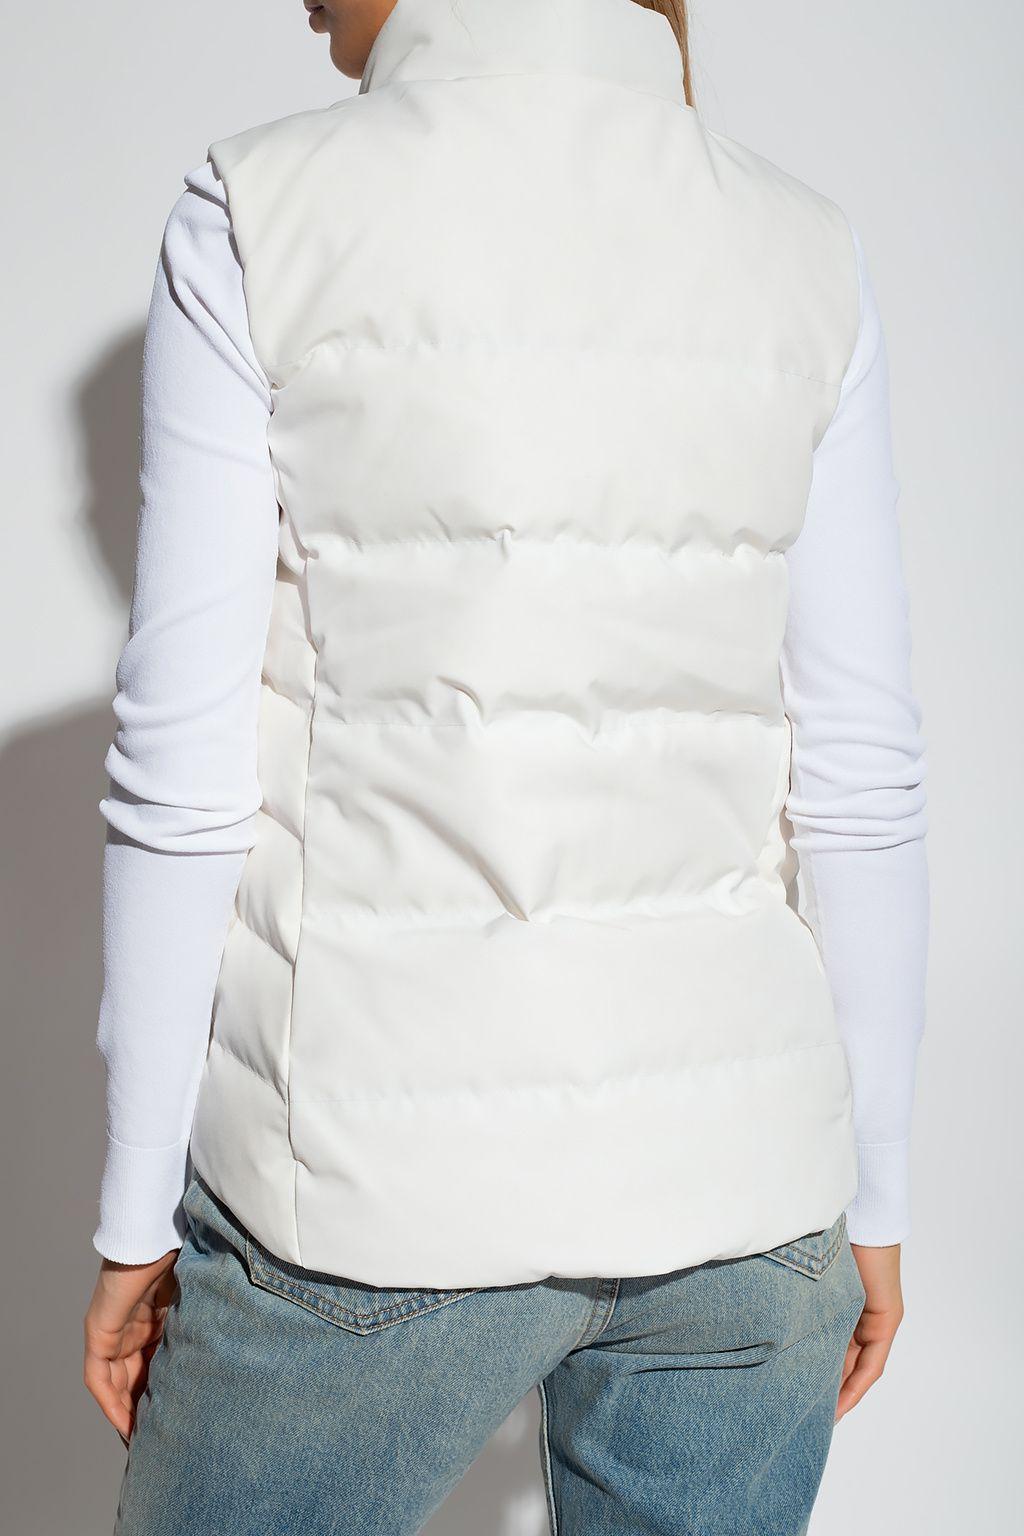 Canada Goose Down Vest in White | Lyst